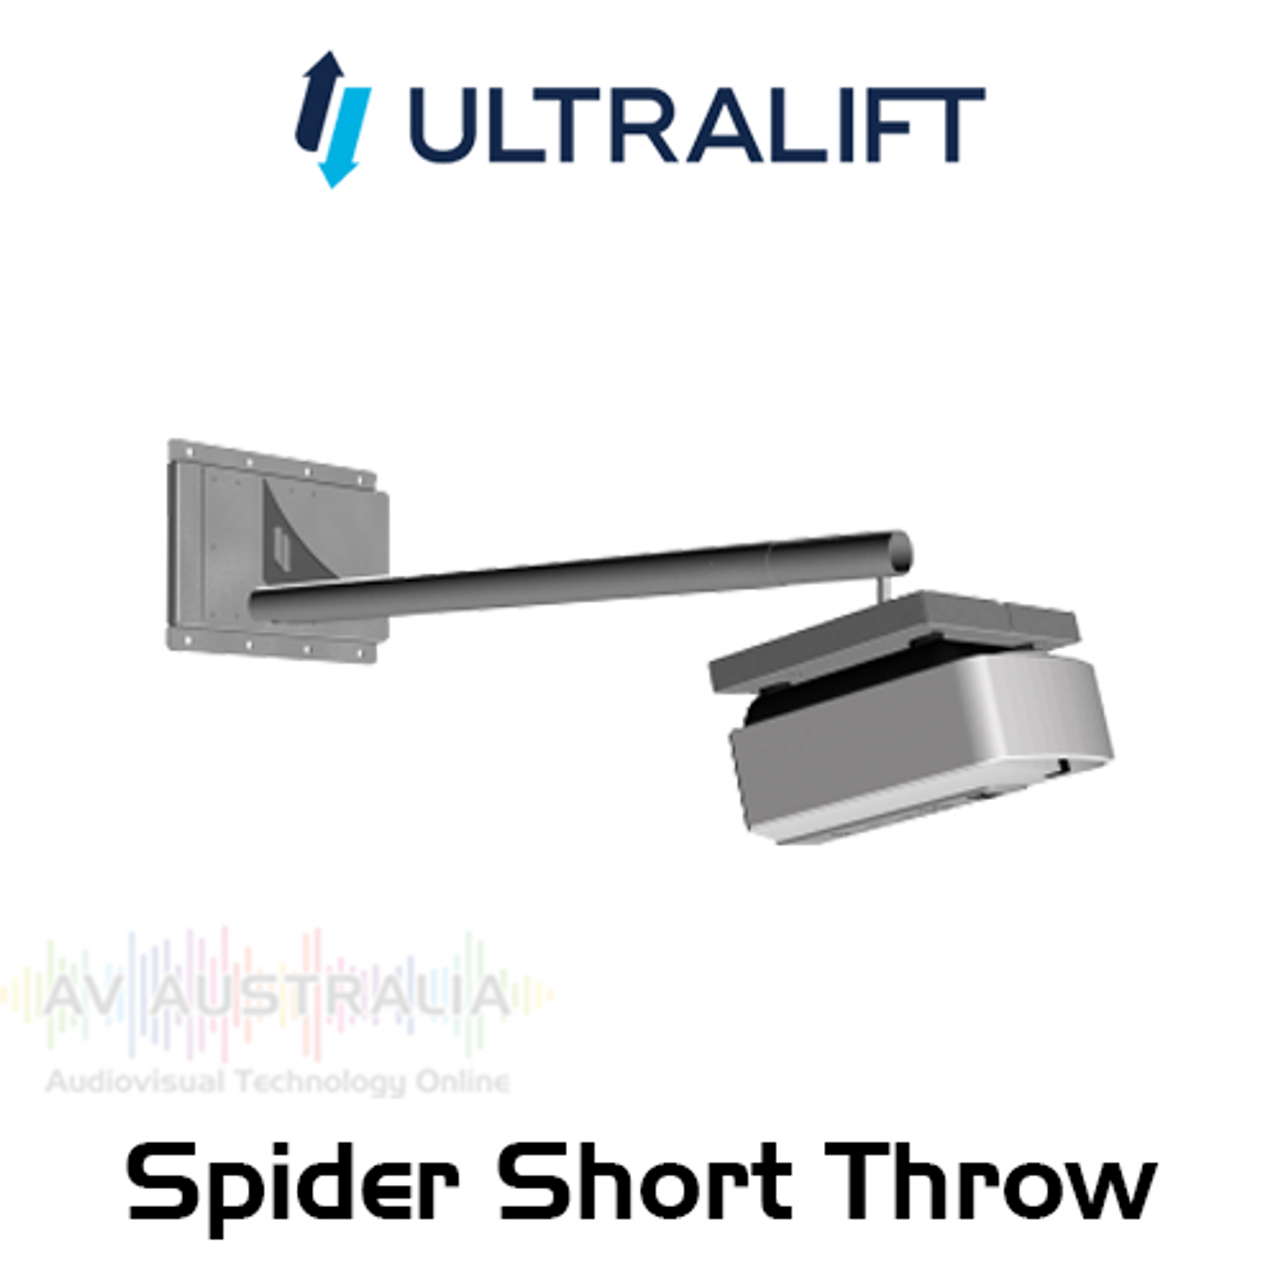 Ultralift Spider Short Throw Ceiling Projector Mount